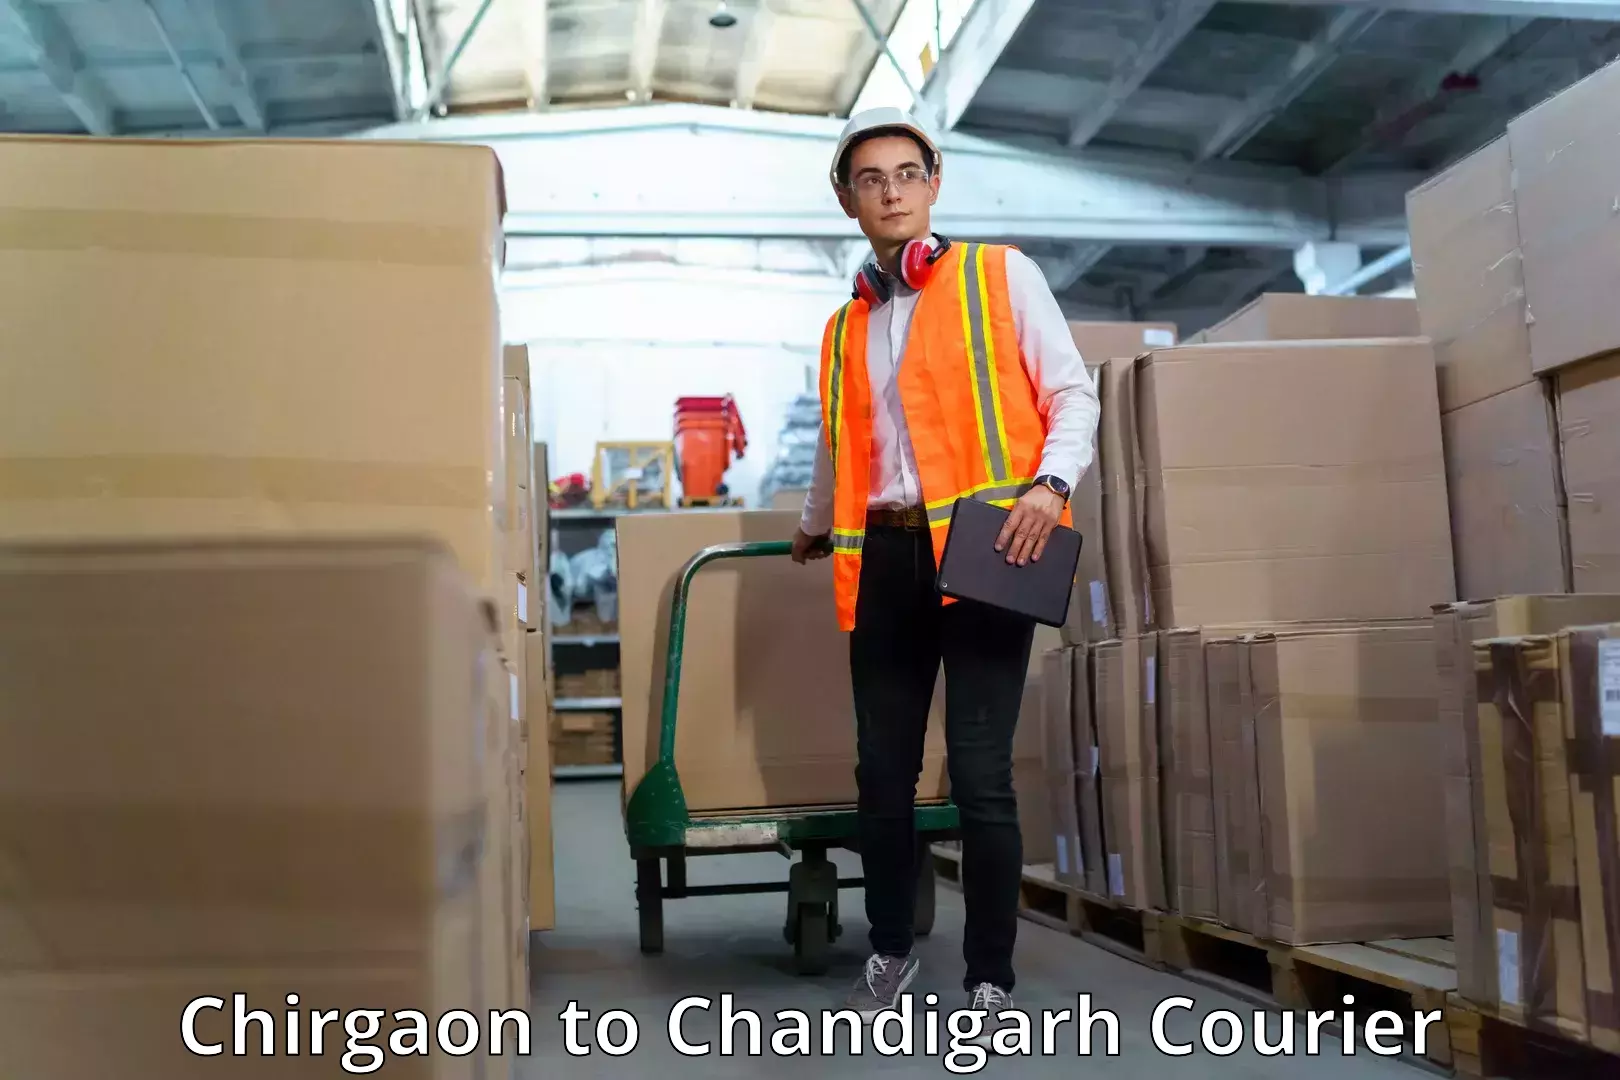 Courier app Chirgaon to Chandigarh